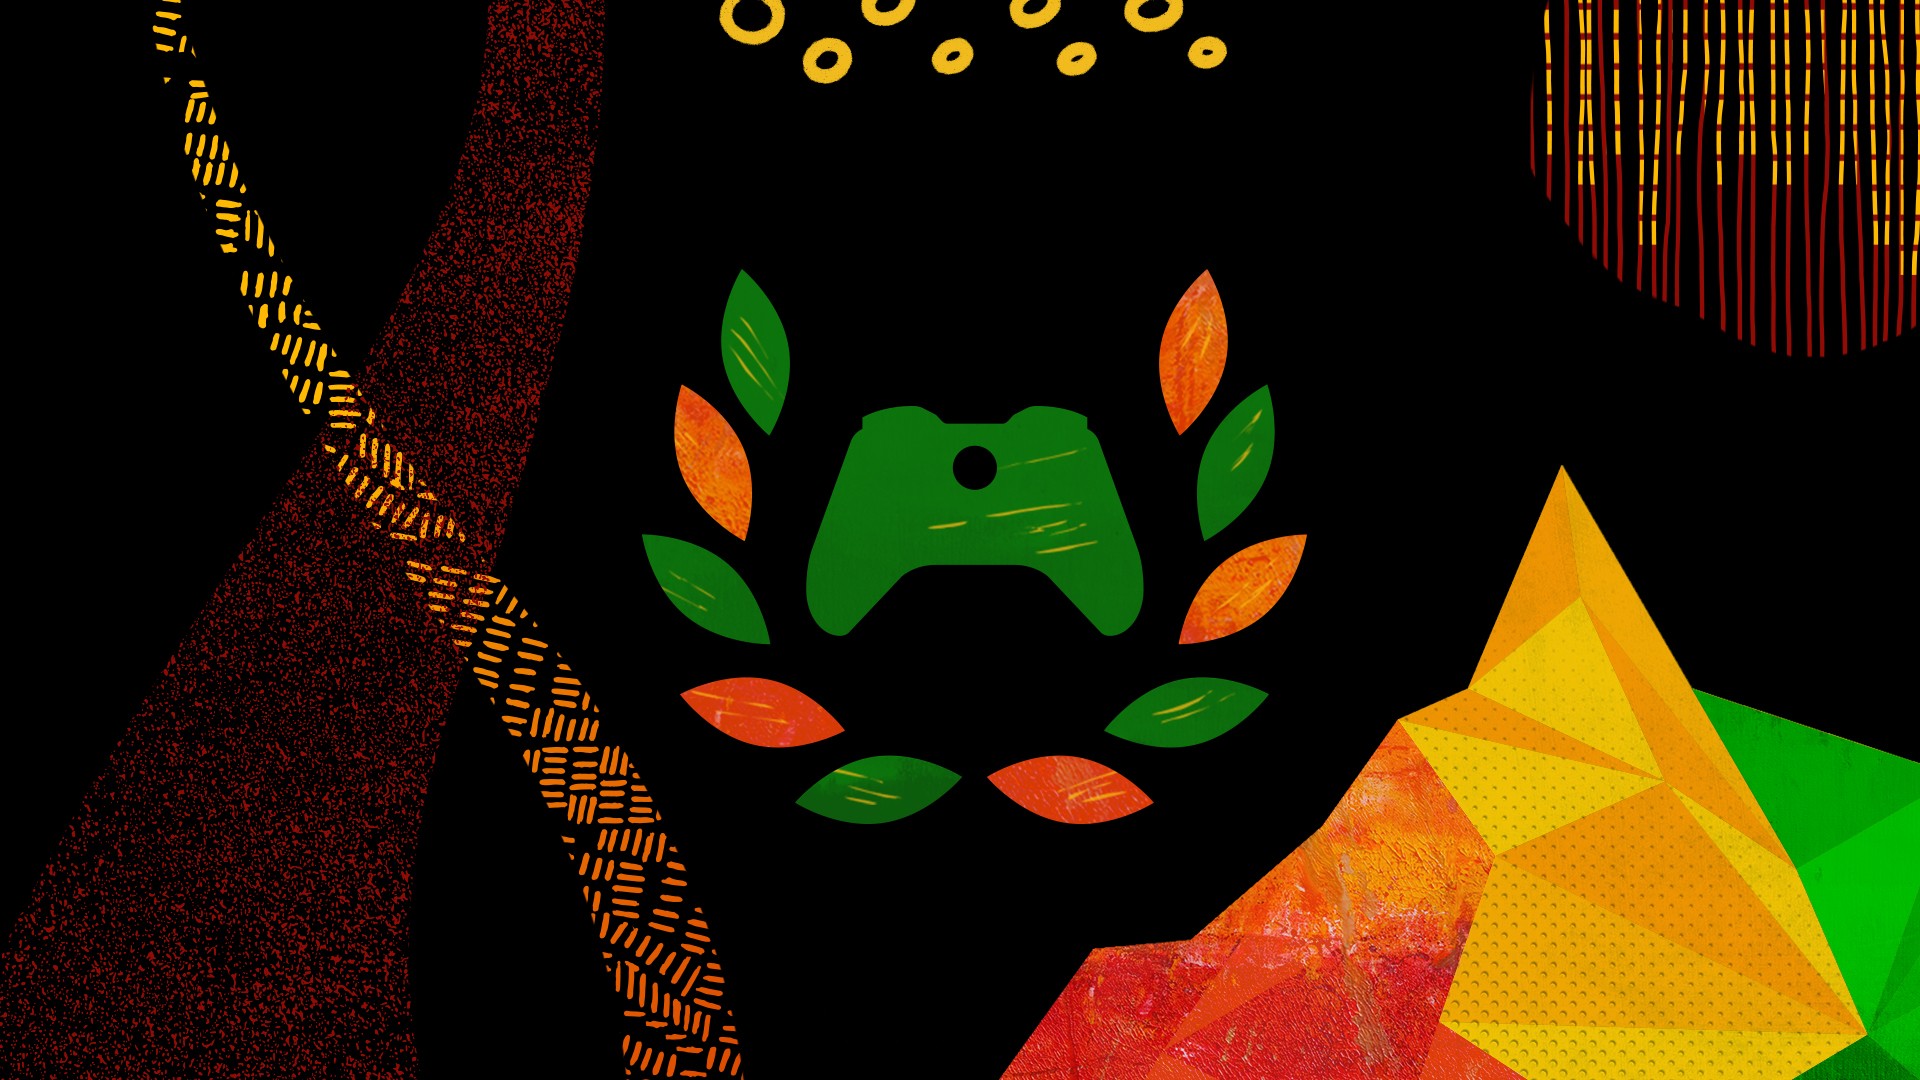 The Xbox Ambassadors logo painted in green and orange overlaid on top of a black background with various patterns colored red, yellow, orange and green stretching across the background.